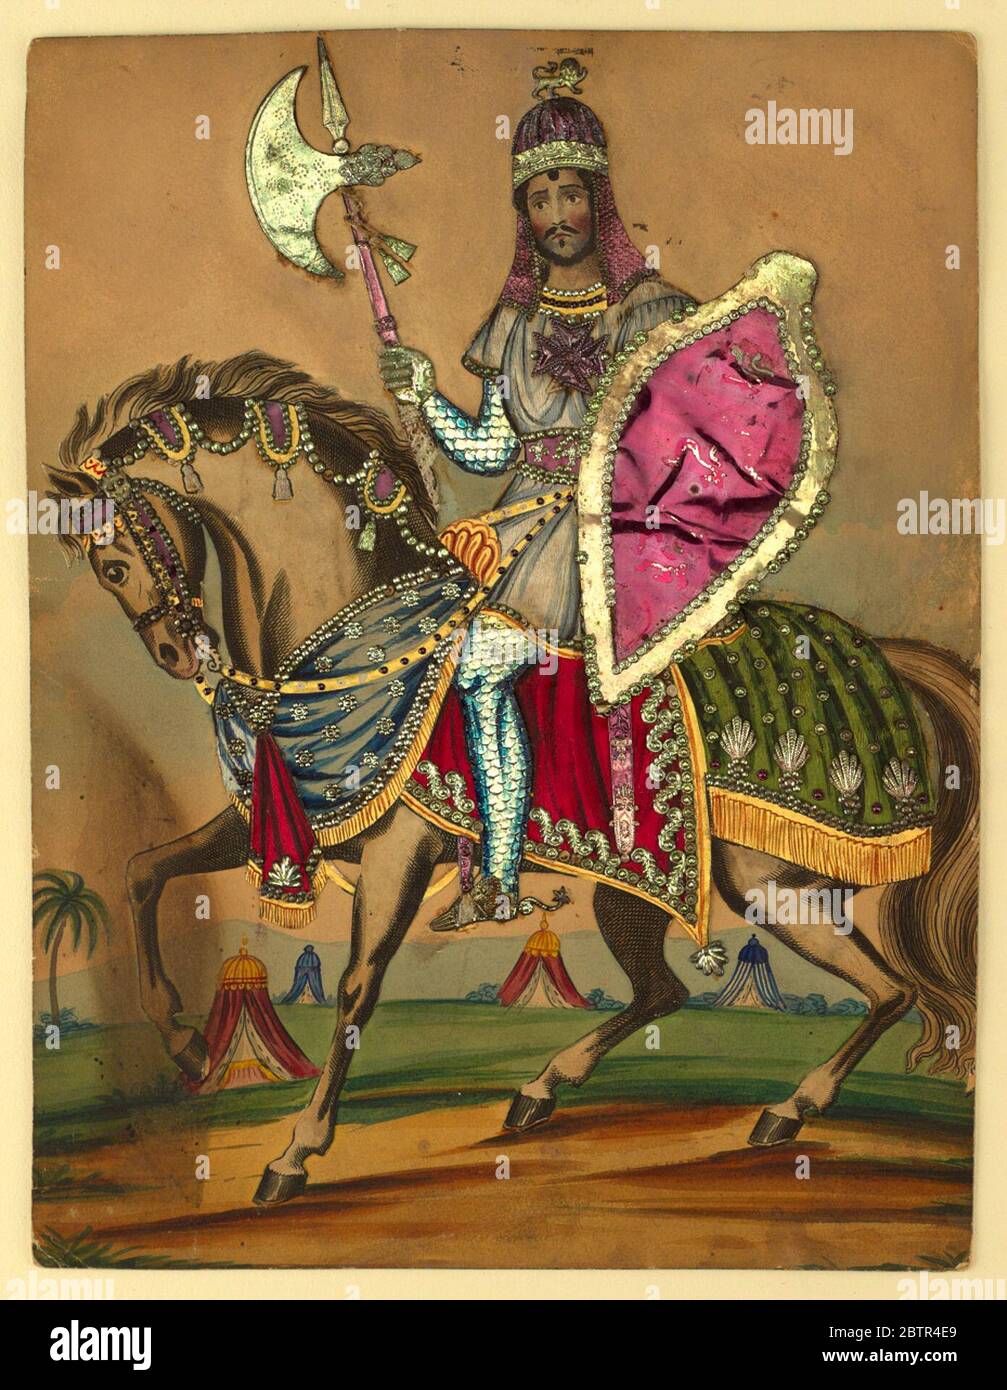 Tinsel Picture Edmund Kean as Richard Coeur de Lion. Research in ProgressThe actor, Edmun Kean, is shown on horseback, clad in armour. The horse and actor's face are engravings, cut out, the trappings silk and embossed metal and paper, and the background, shown an encampment, an original drawing. Stock Photo